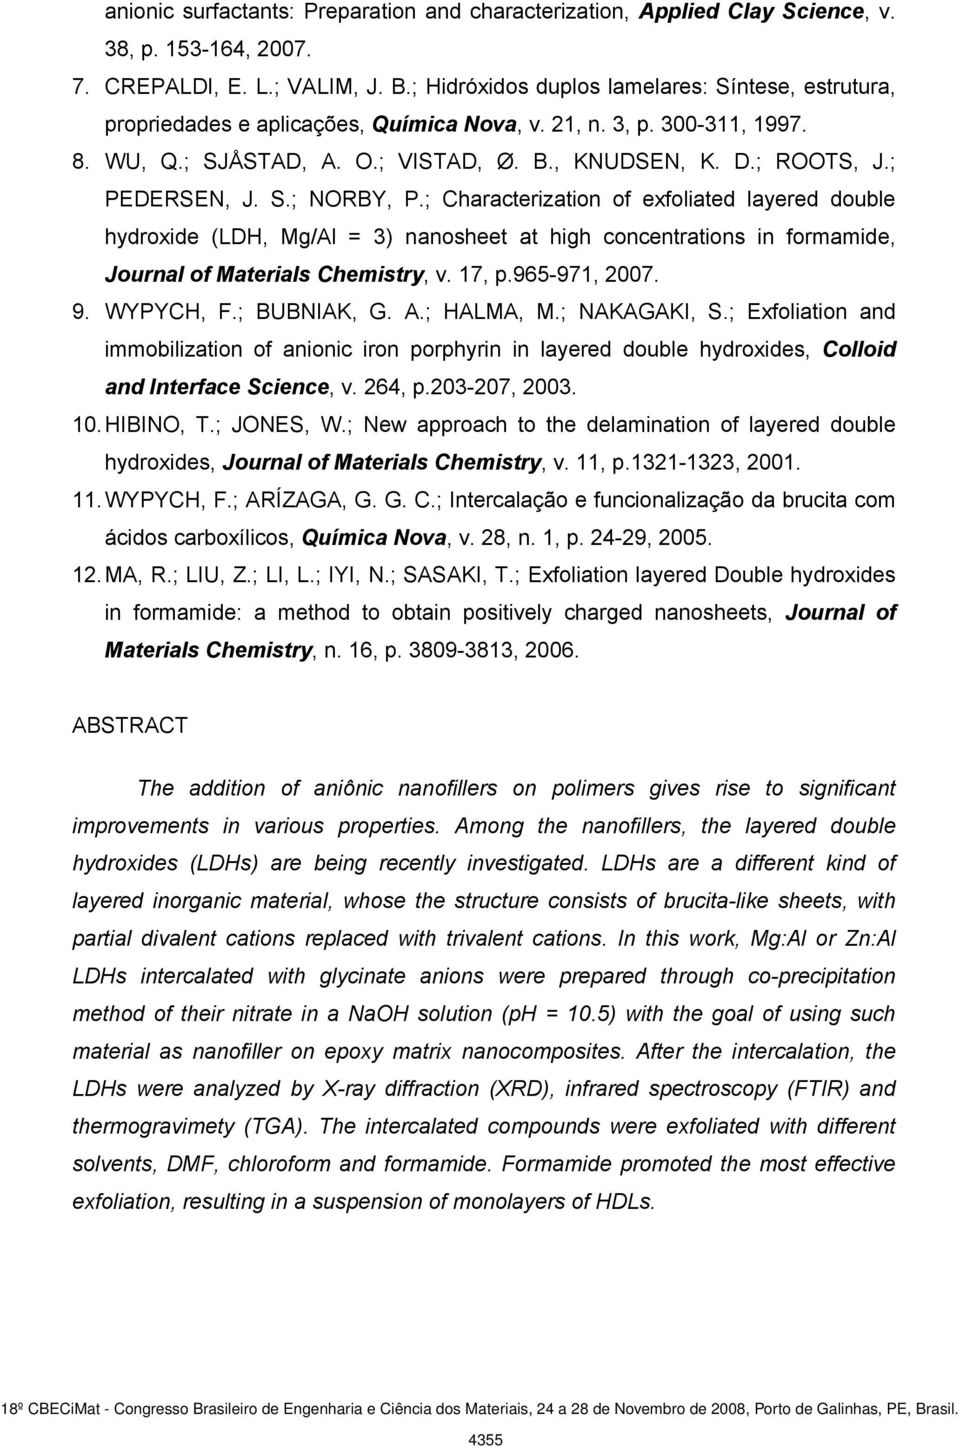 ; PEDERSEN, J. S.; NORBY, P.; Characterization of exfoliated layered double hydroxide (LDH, Mg/Al = 3) nanosheet at high concentrations in formamide, Journal of Materials Chemistry, v. 17, p.